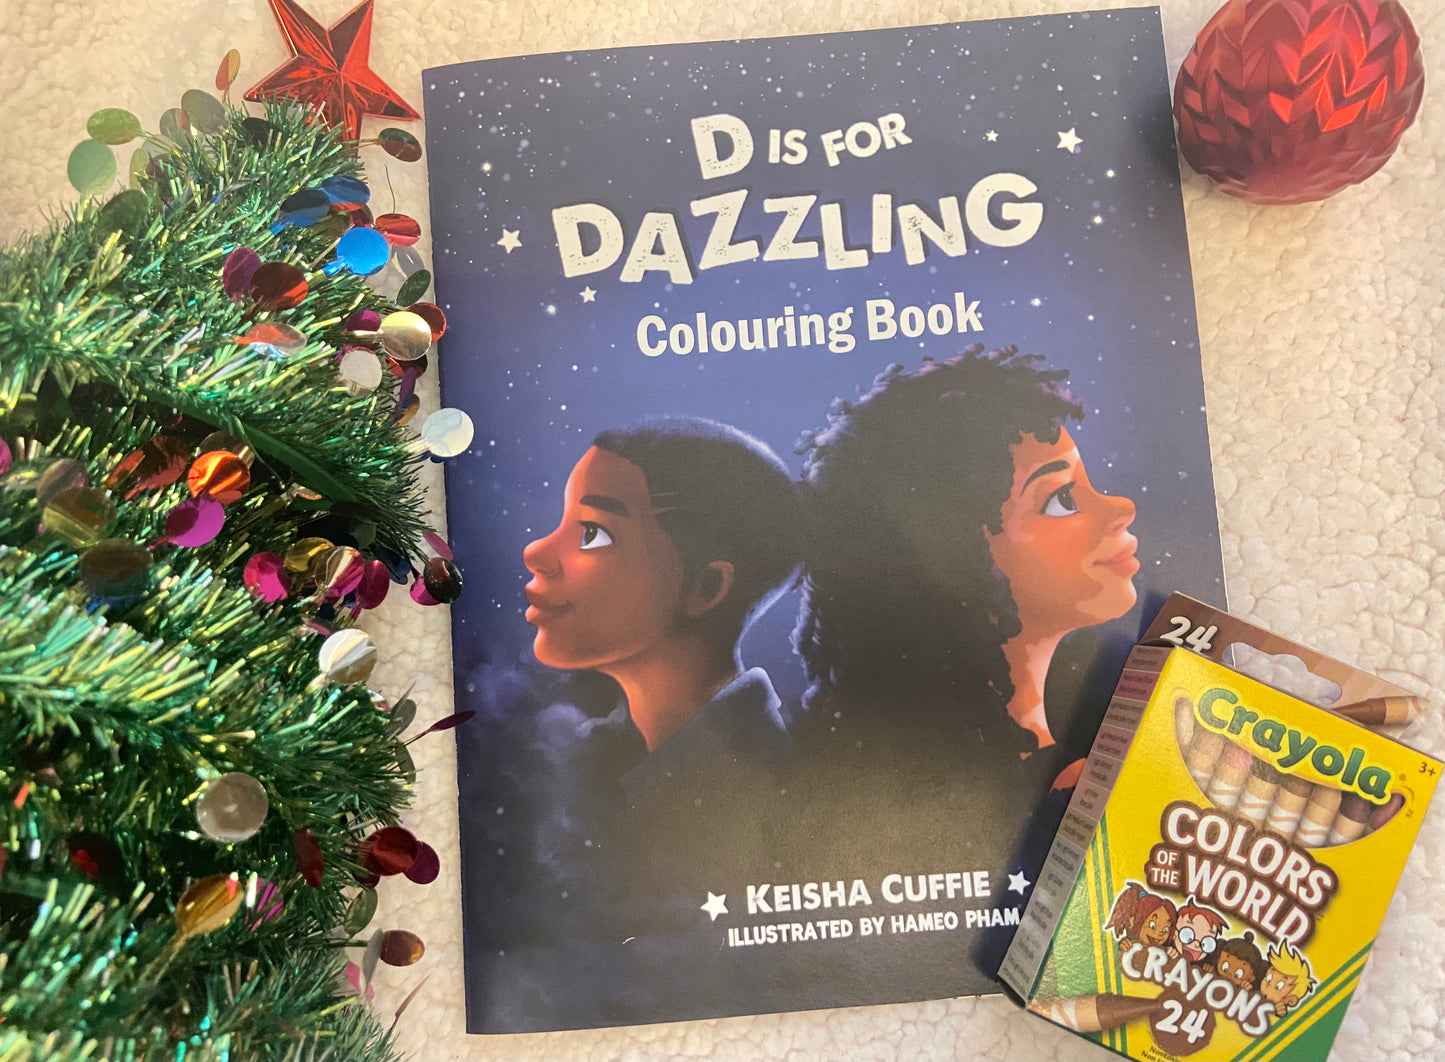 D is for Dazzling Colouring Book